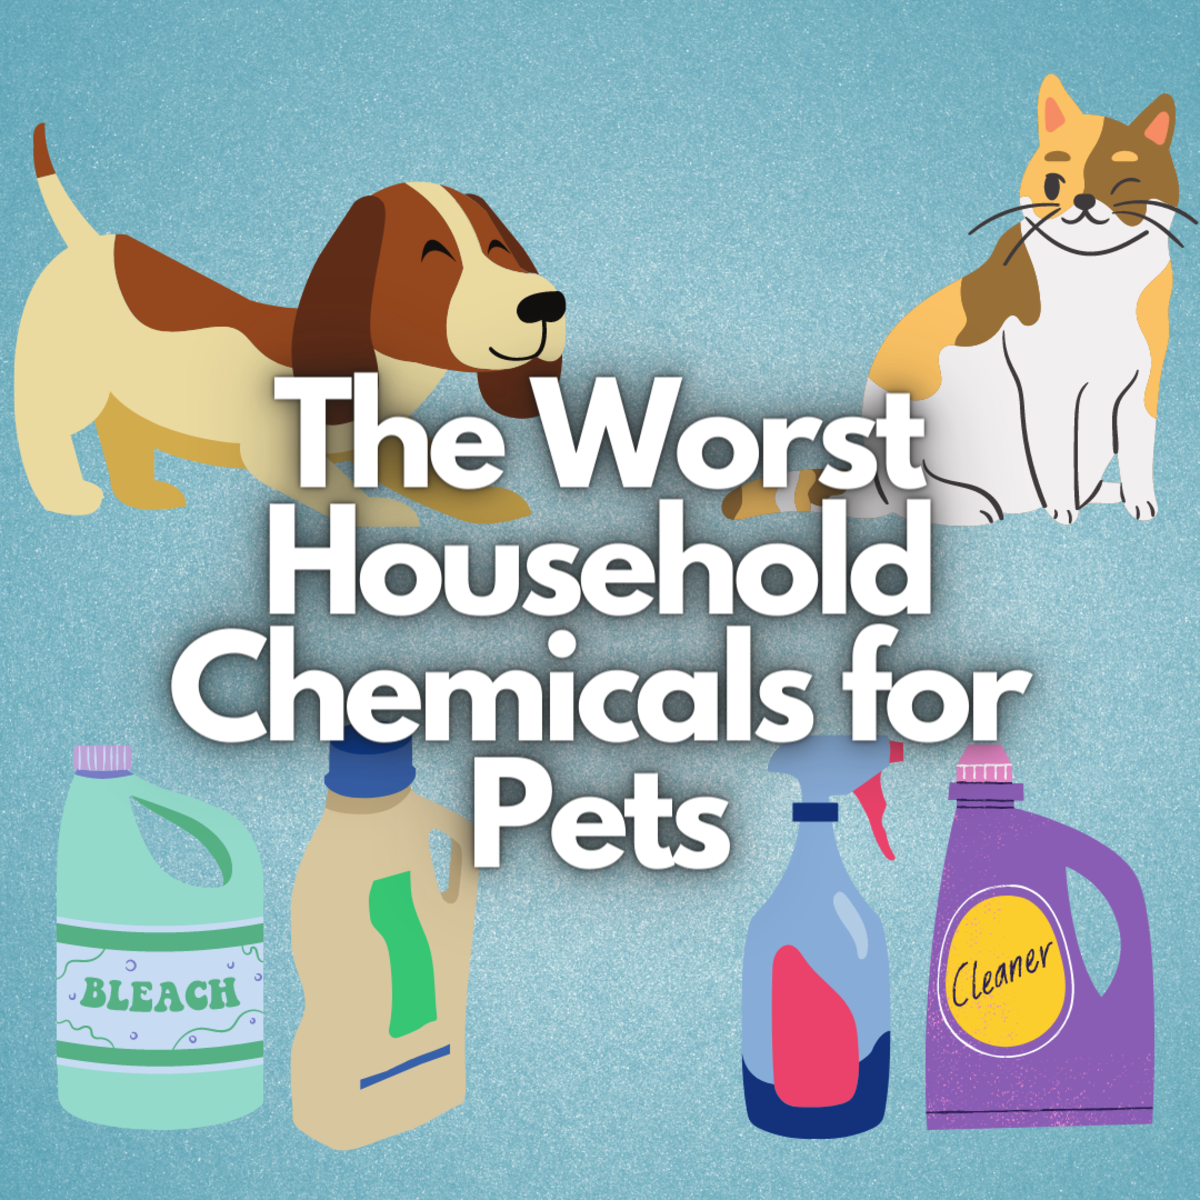 Bleach and Other Household Chemicals That Are Bad for Pets